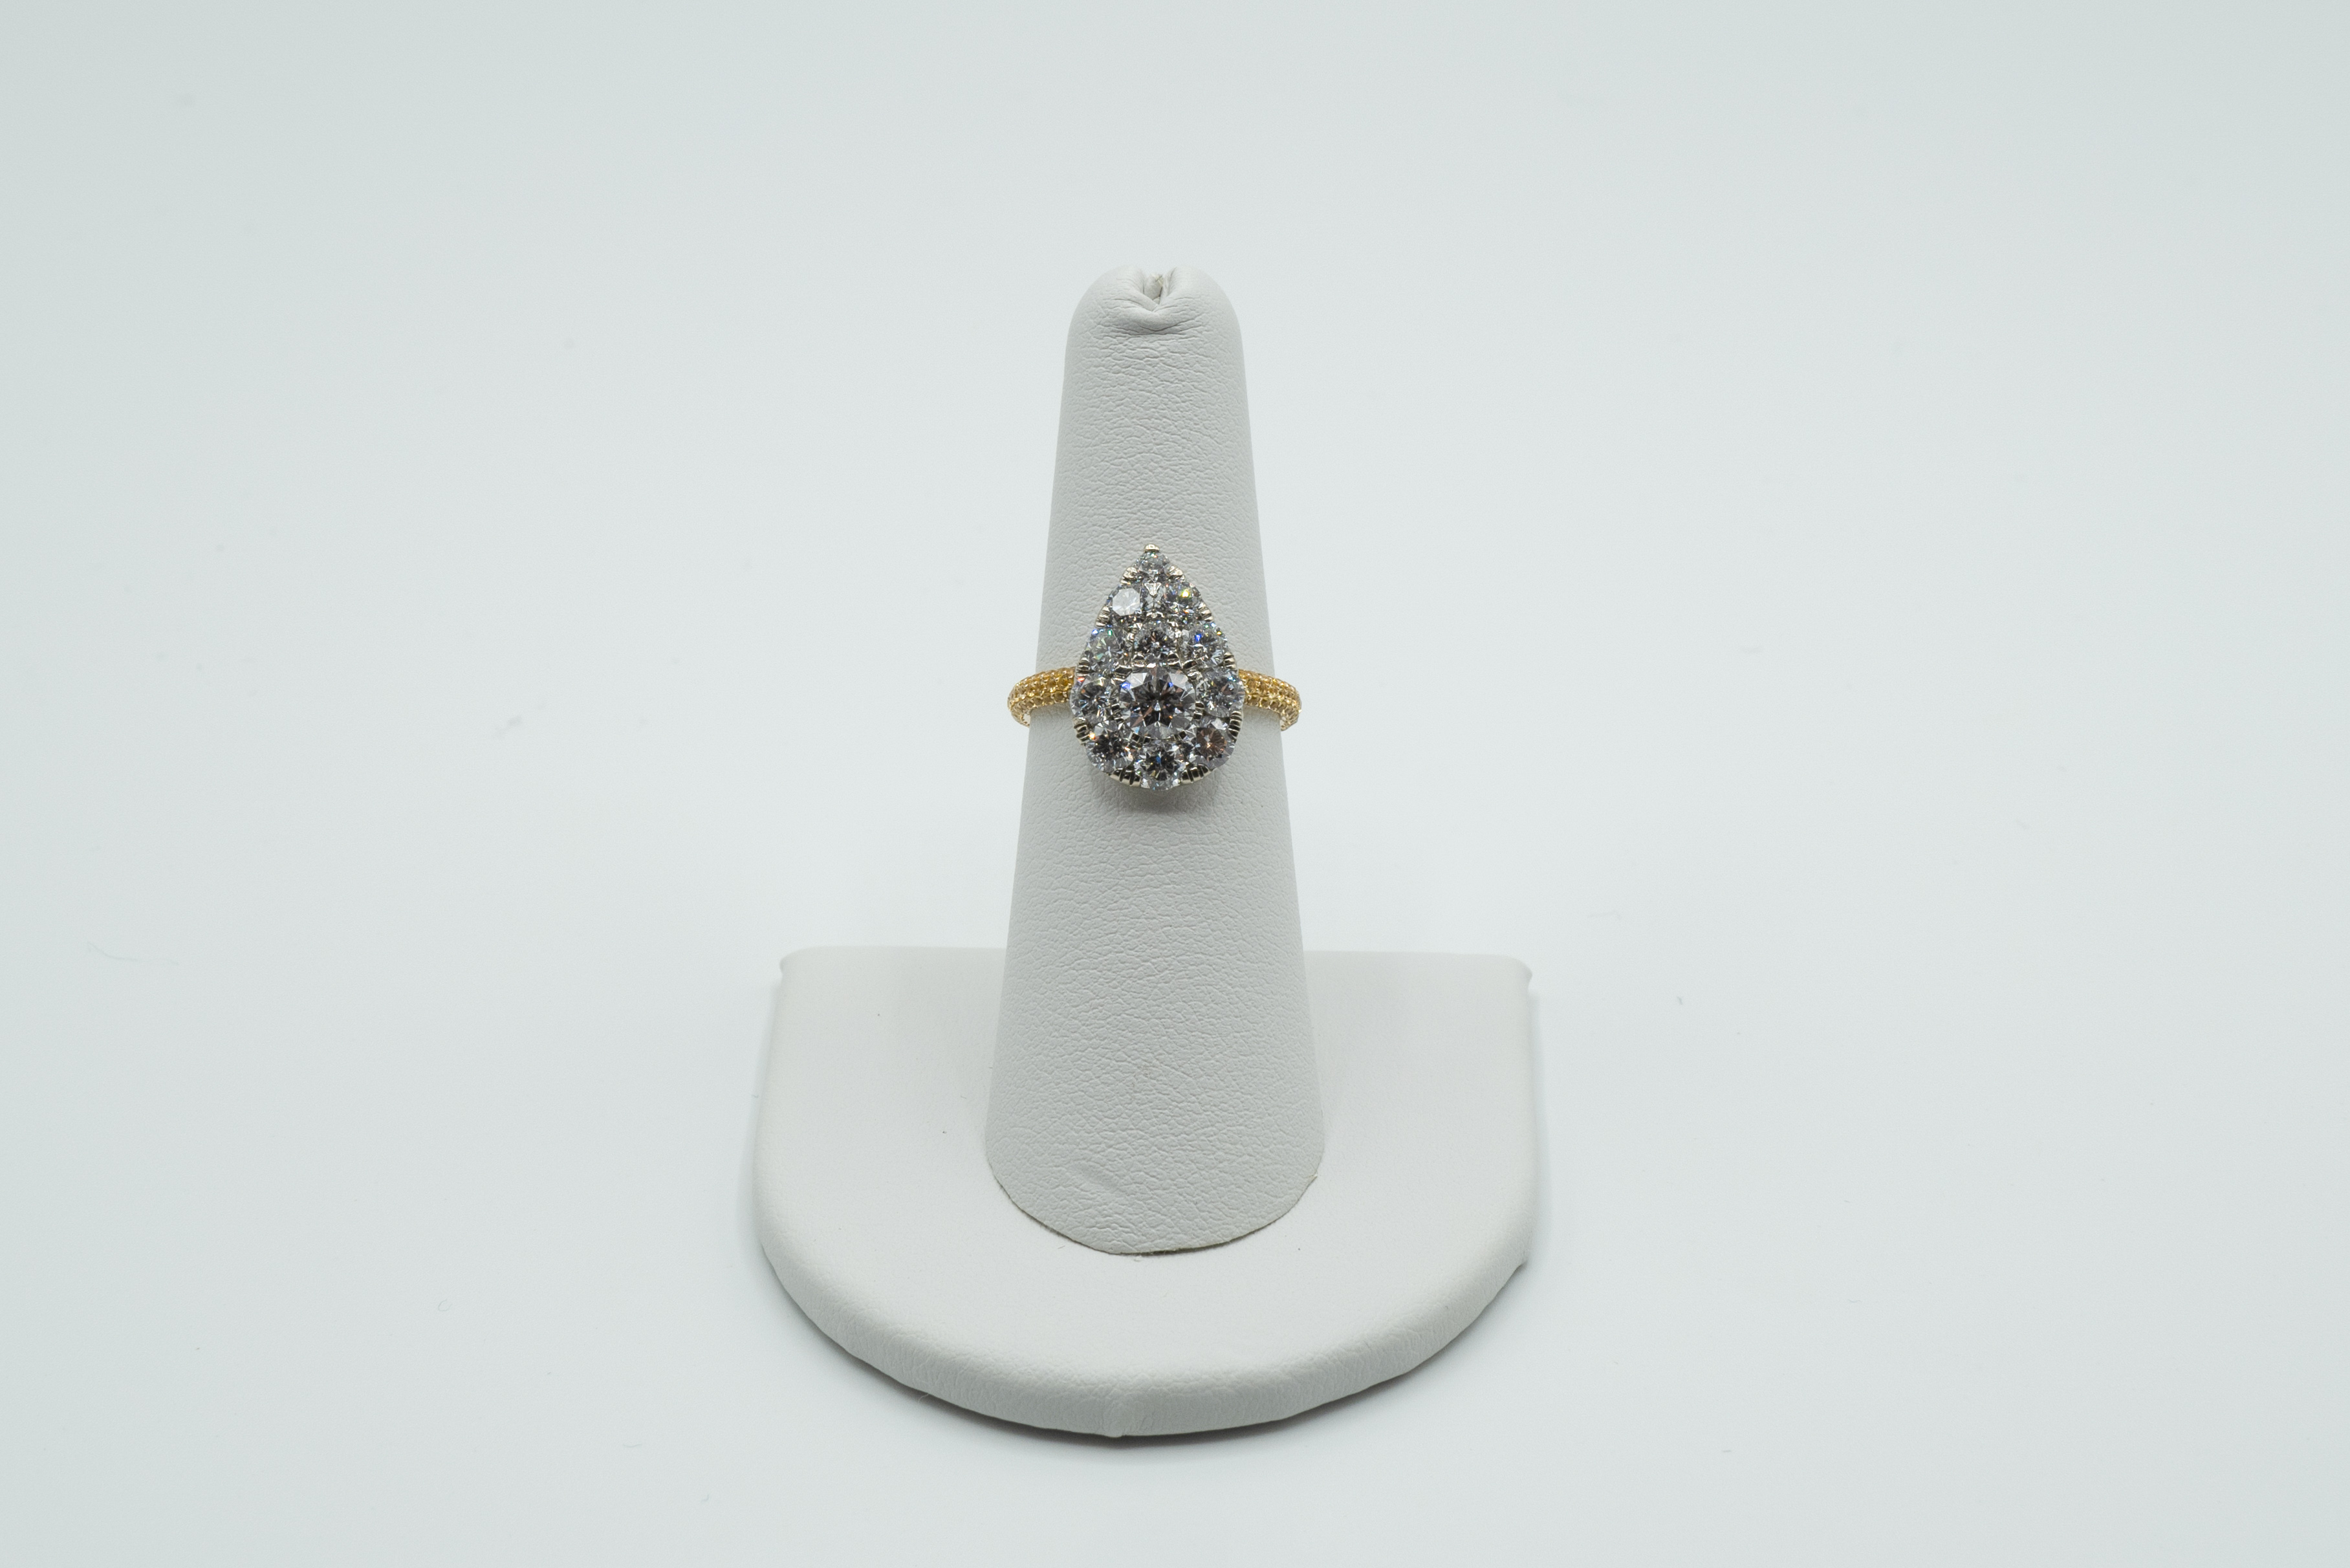 Yellow Sapphire and Diamond Pear Shaped Ring.  Band is 14k Yellow Gold with Yellow Sapphires, top is 1.98 carats diamond in 18k White Gold, Faces Up like approx 6 carats